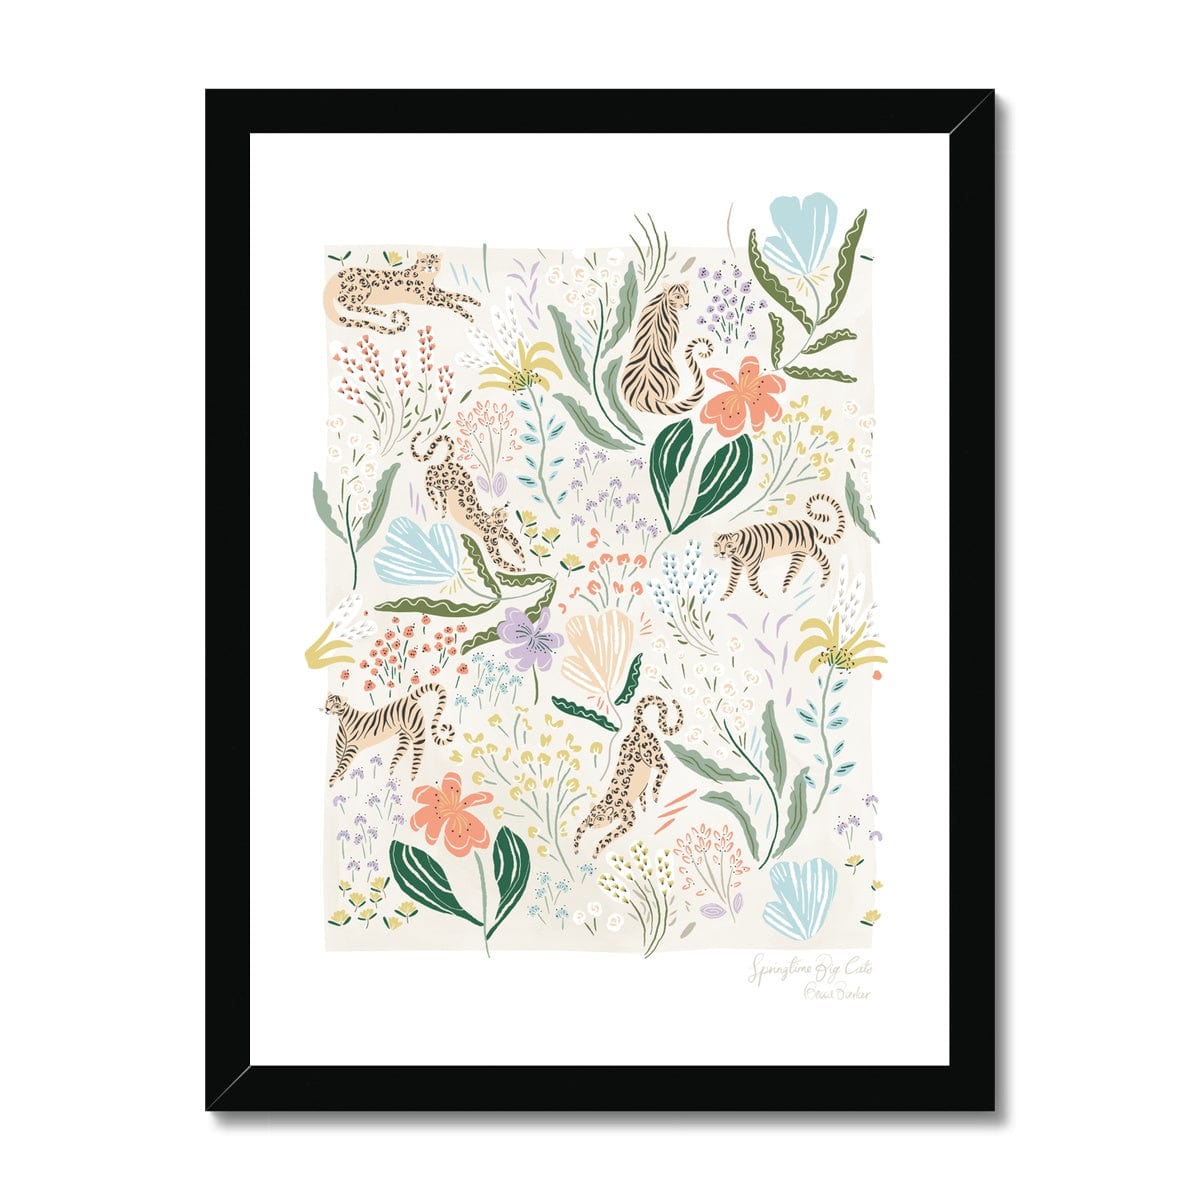 Art print in black frame. Our Springtime Big Cats art print features dainty florals in pinks, corals, and purples, with lush folliage with tigers and leopards in amongst the plants, with a white border.